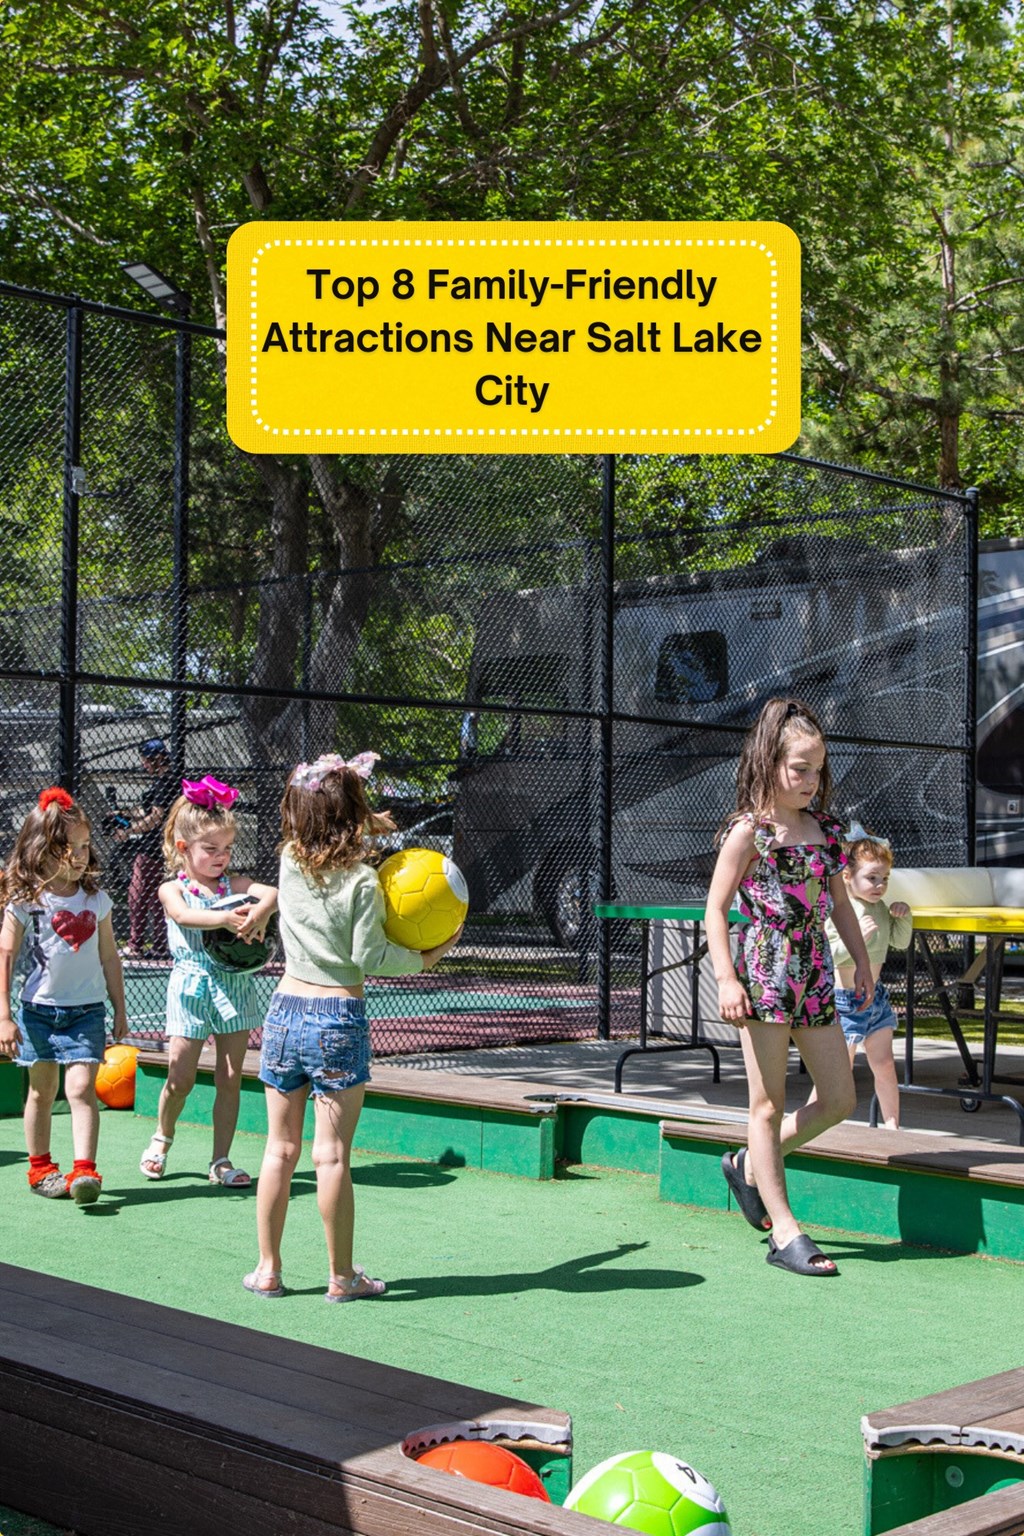 TOP 8 FAMILY-FRIENDLY ATTRACTIONS NEAR SALT LAKE CITY